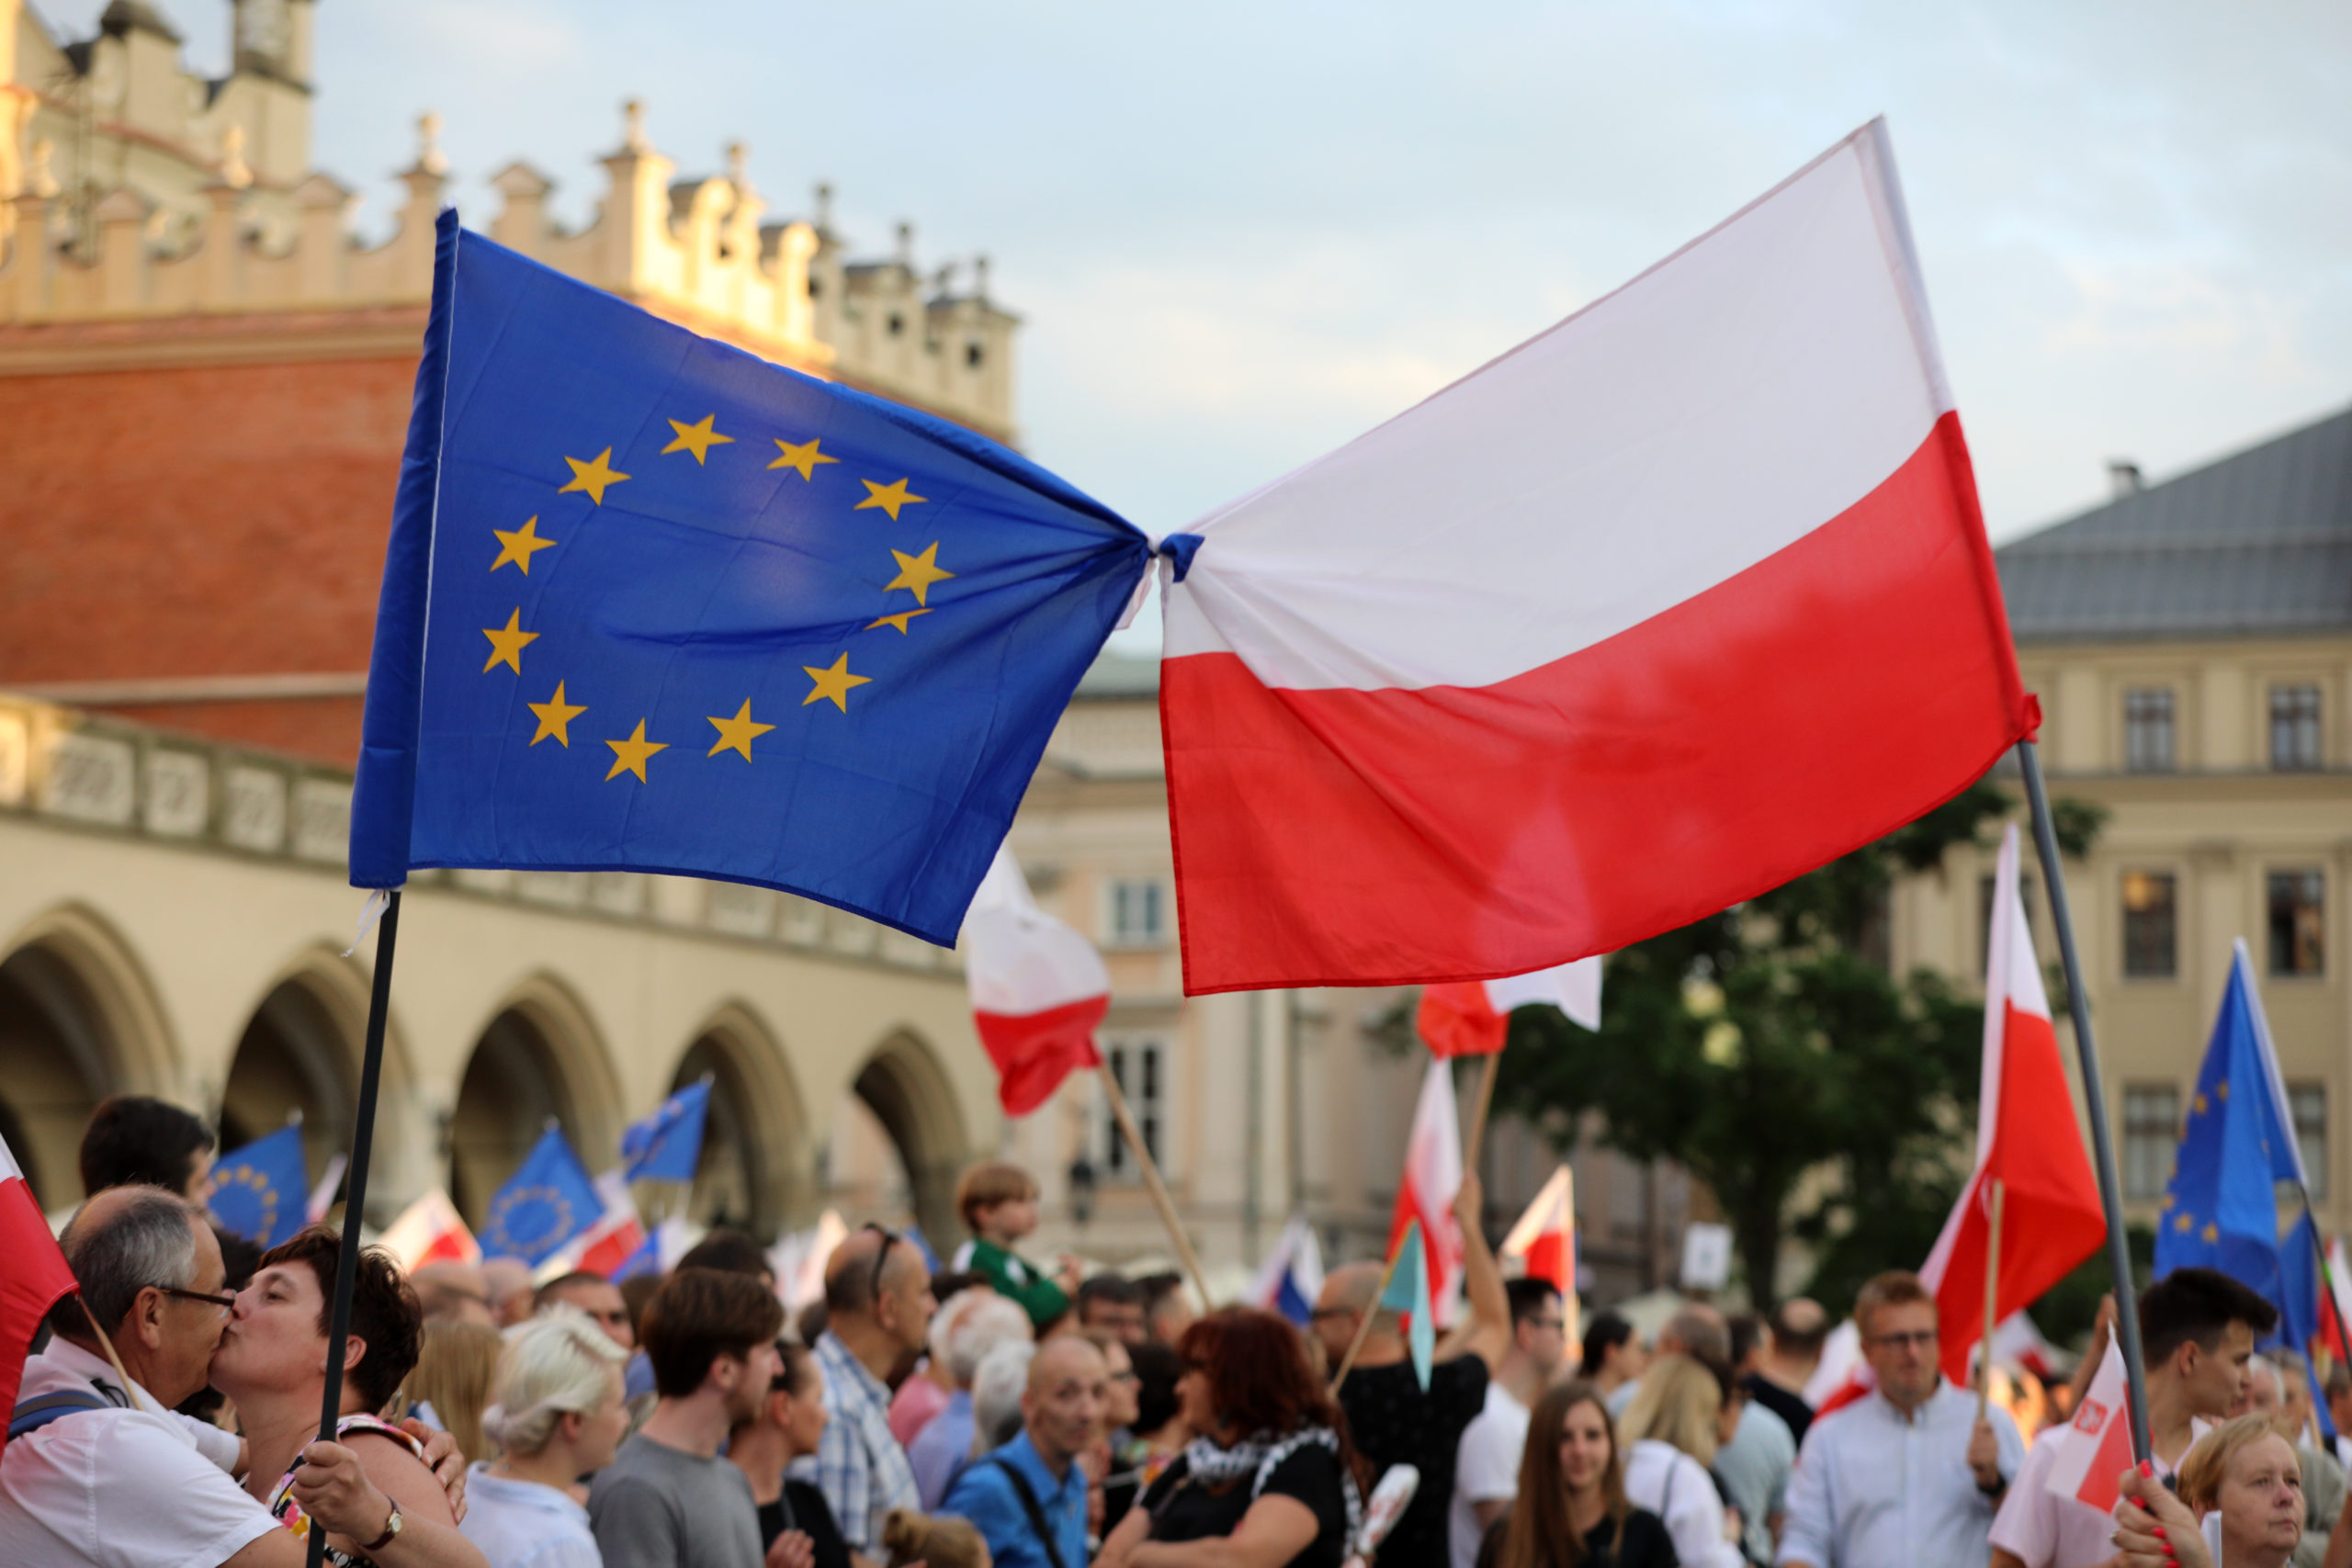 Will Poland relent in rule-of-law dispute?